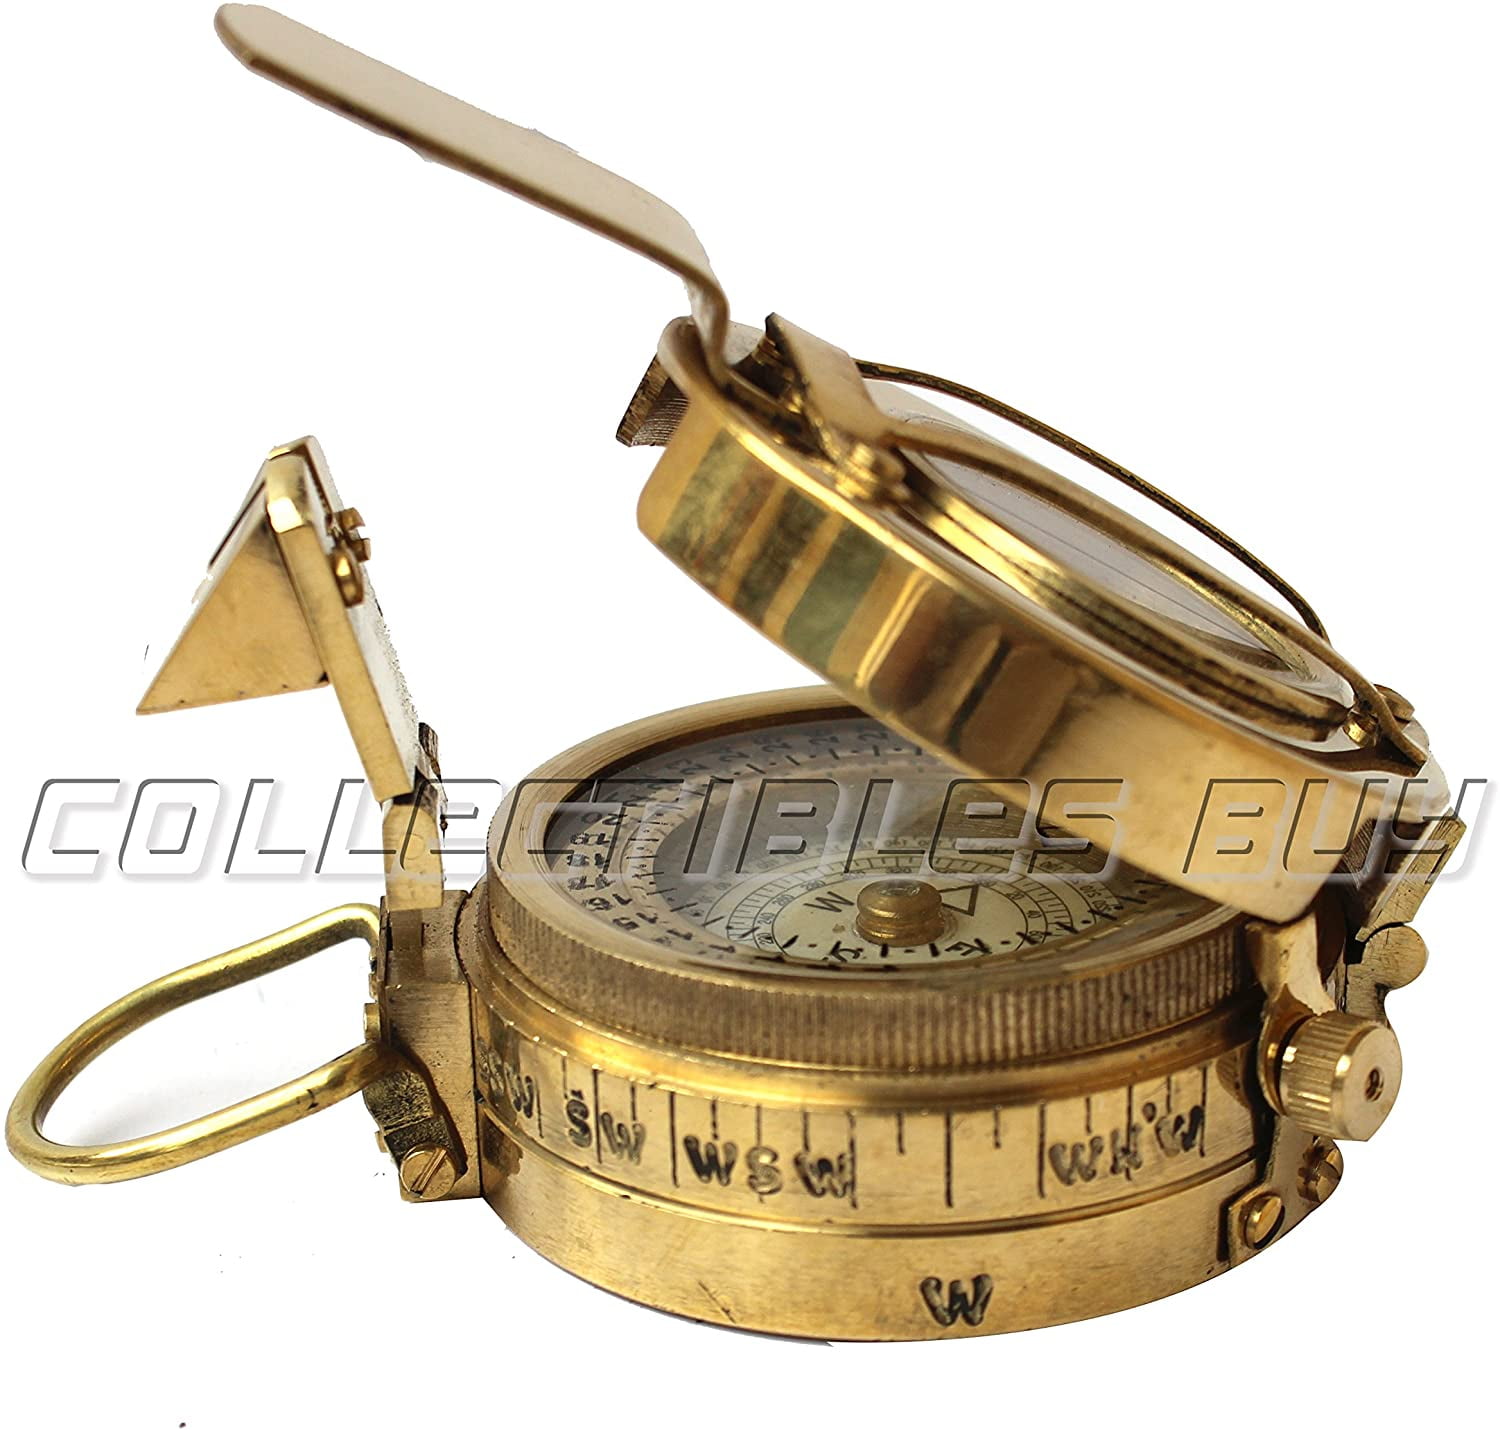 Vintage Military Nautical Brass Compass Antique Collectible Decor Gift Item 